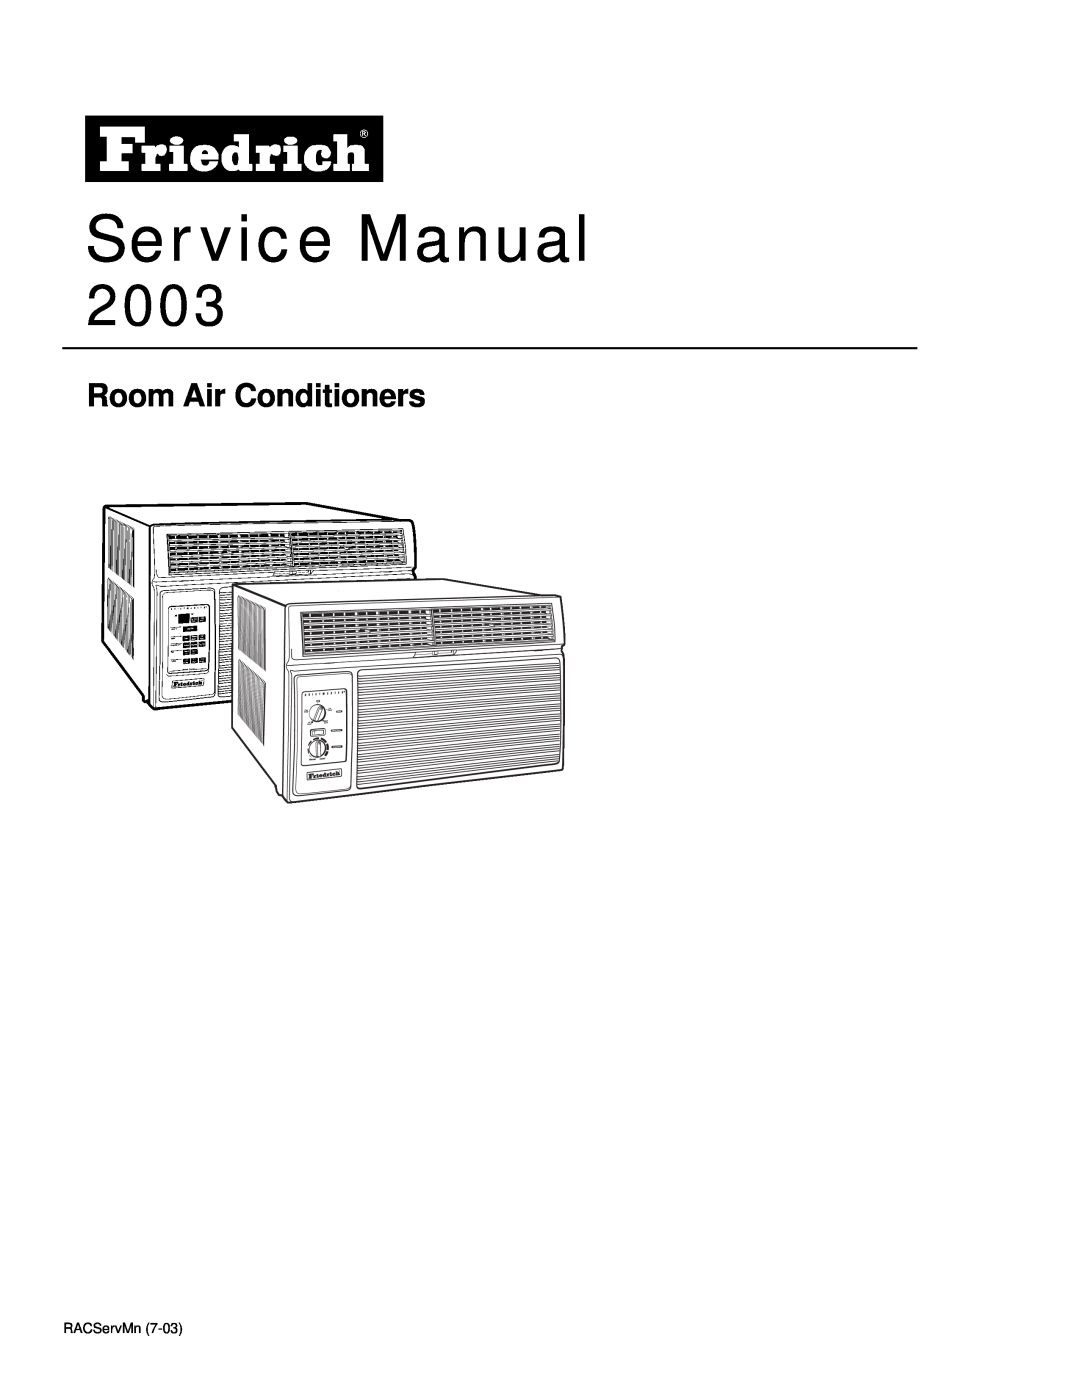 Friedrich racservmn service manual Room Air Conditioners, 2003 